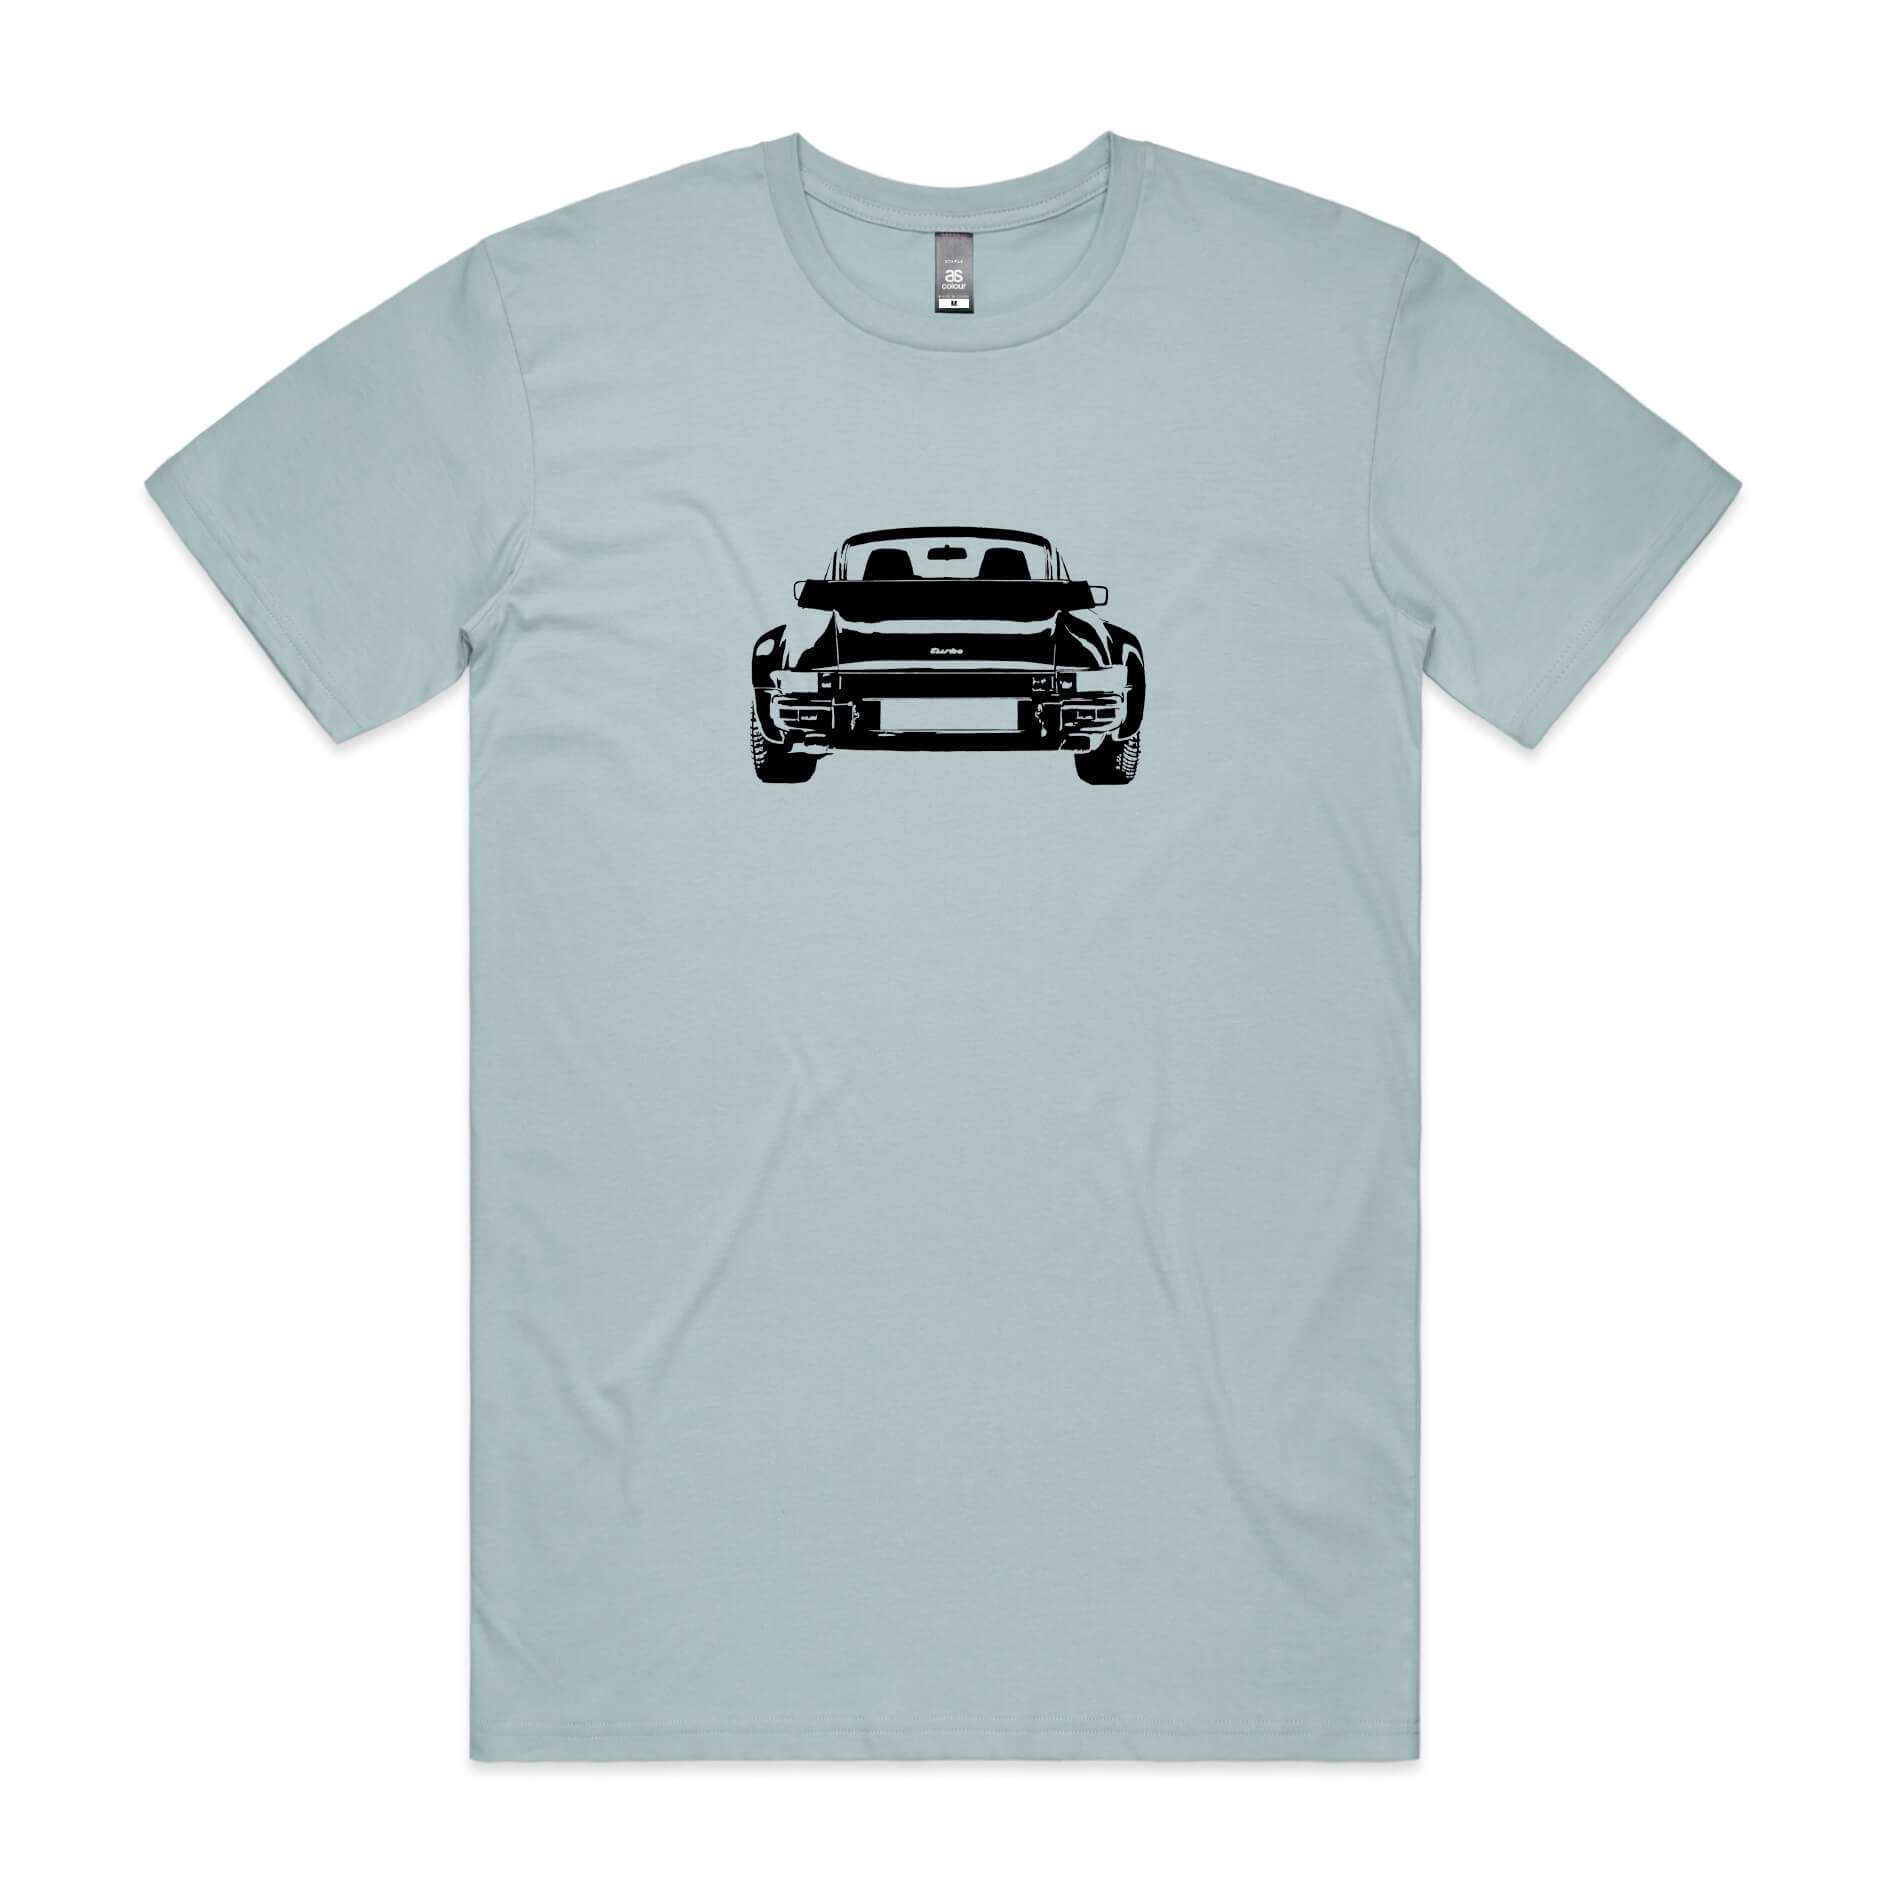 Porsche 911 turbo t-shirt in light blue with a black car graphic